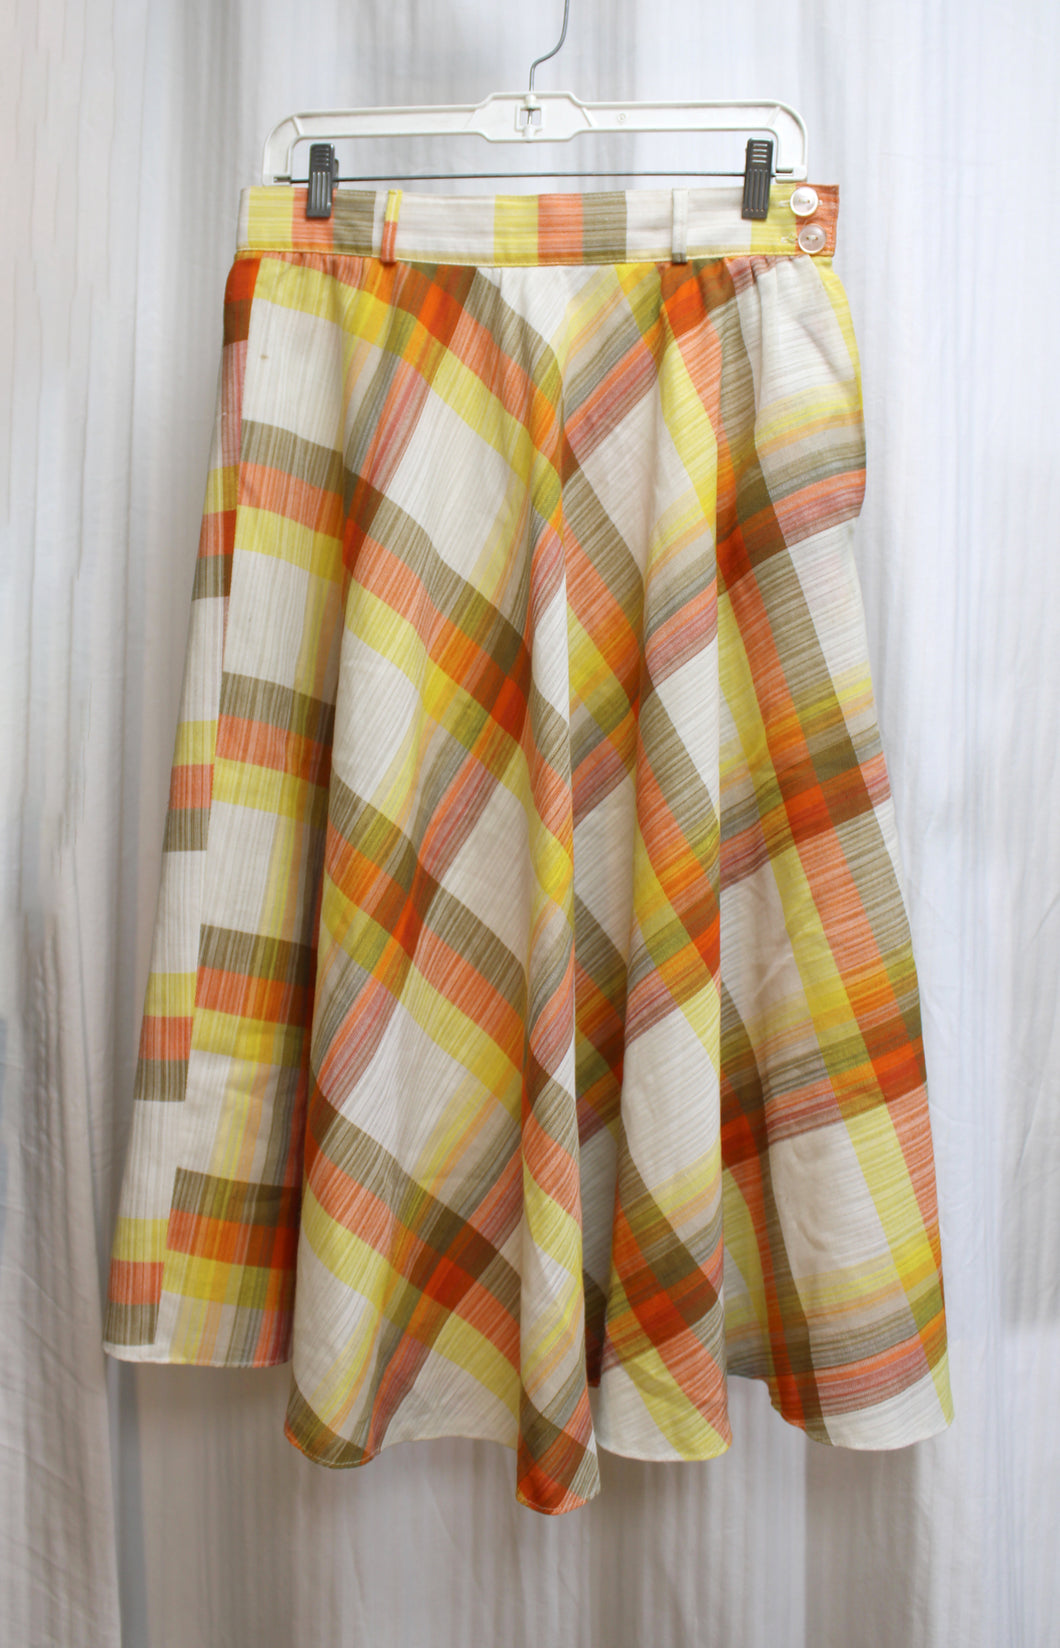 Vintage - White, Orange, Yellow and Brown Plaid A Line Skirt - See Measurements 28